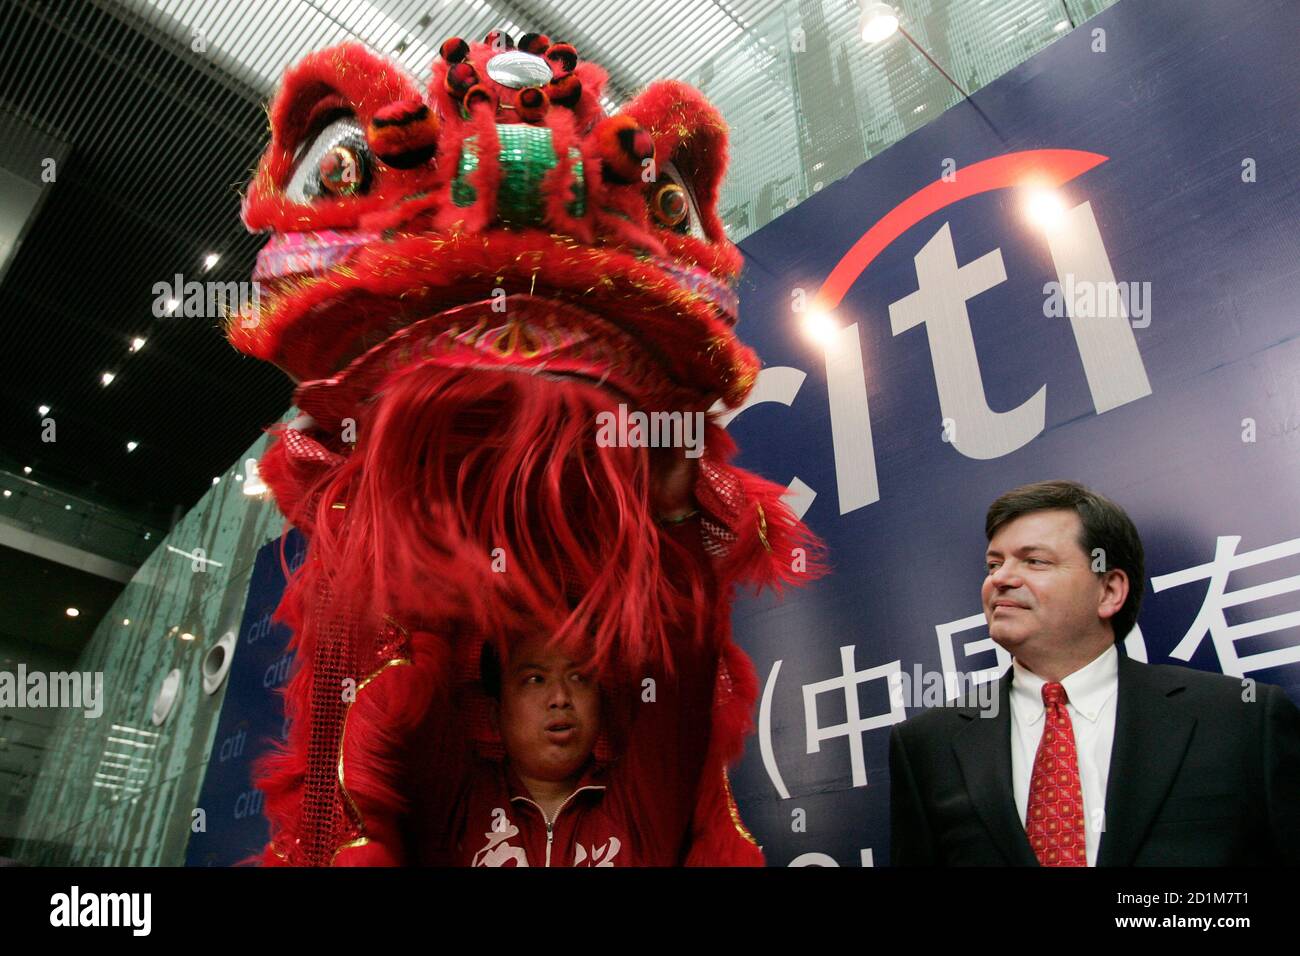 Richard Stanley (R), chairman of Citibank (China) Co. Ltd., enjoys a performance at a ceremony for its official launch in China as a locally incorporated bank, in Shanghai April 2, 2007. Citigroup Inc. said on Monday that it plans to issue cash payment card for its individual clients in China after the world's largest financial services provider launched its local incorporation there.    REUTERS/Aly Song (CHINA) Stock Photo